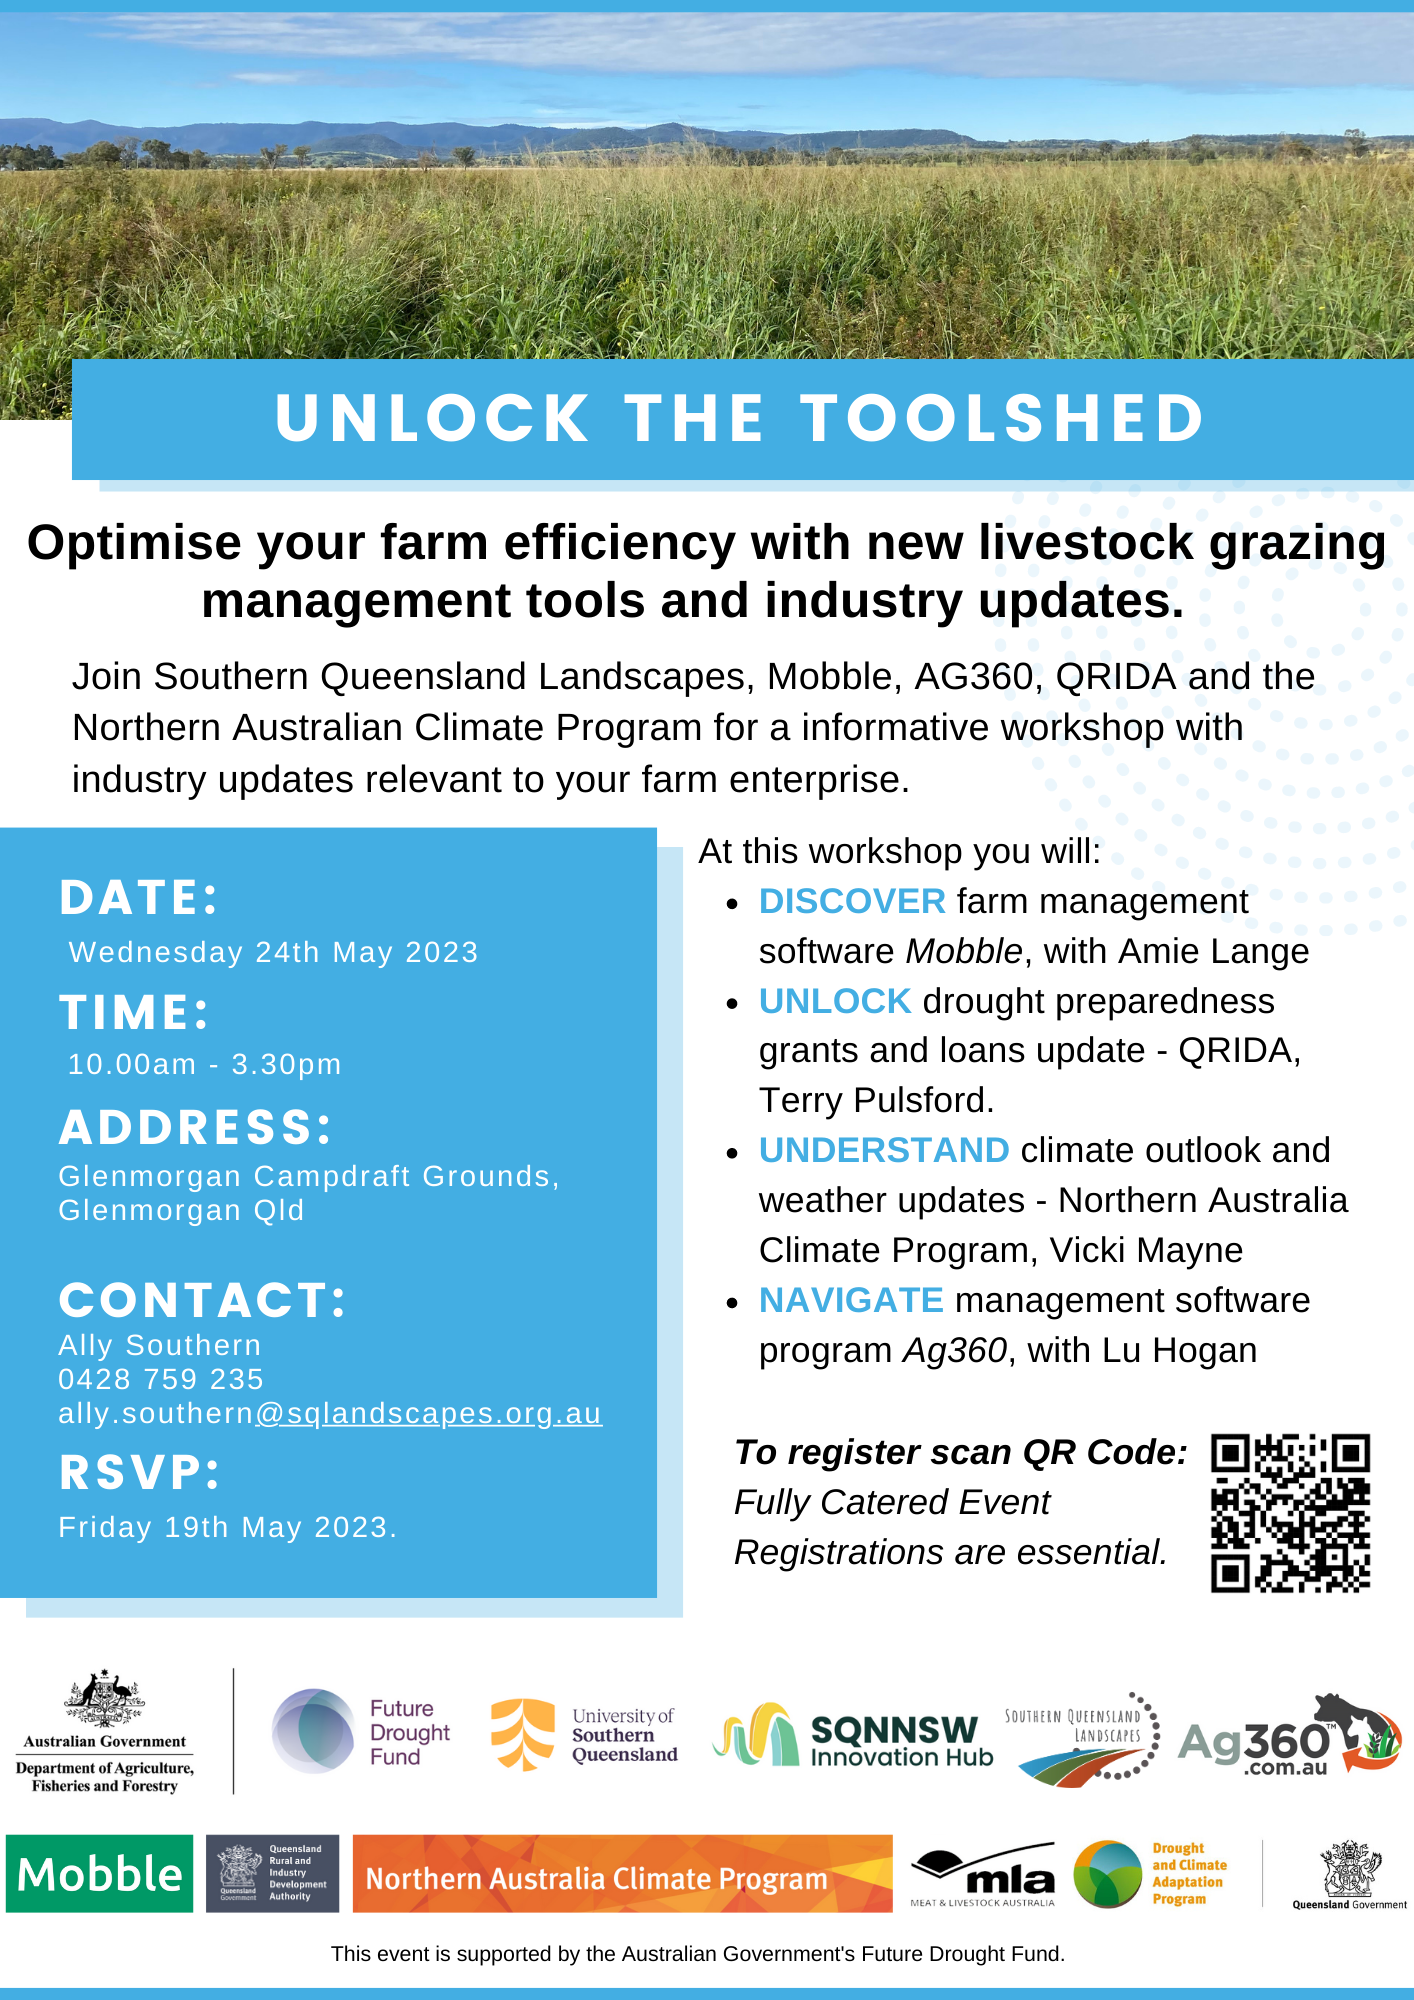 Unlock the toolshed event flyer at Glenmorgan